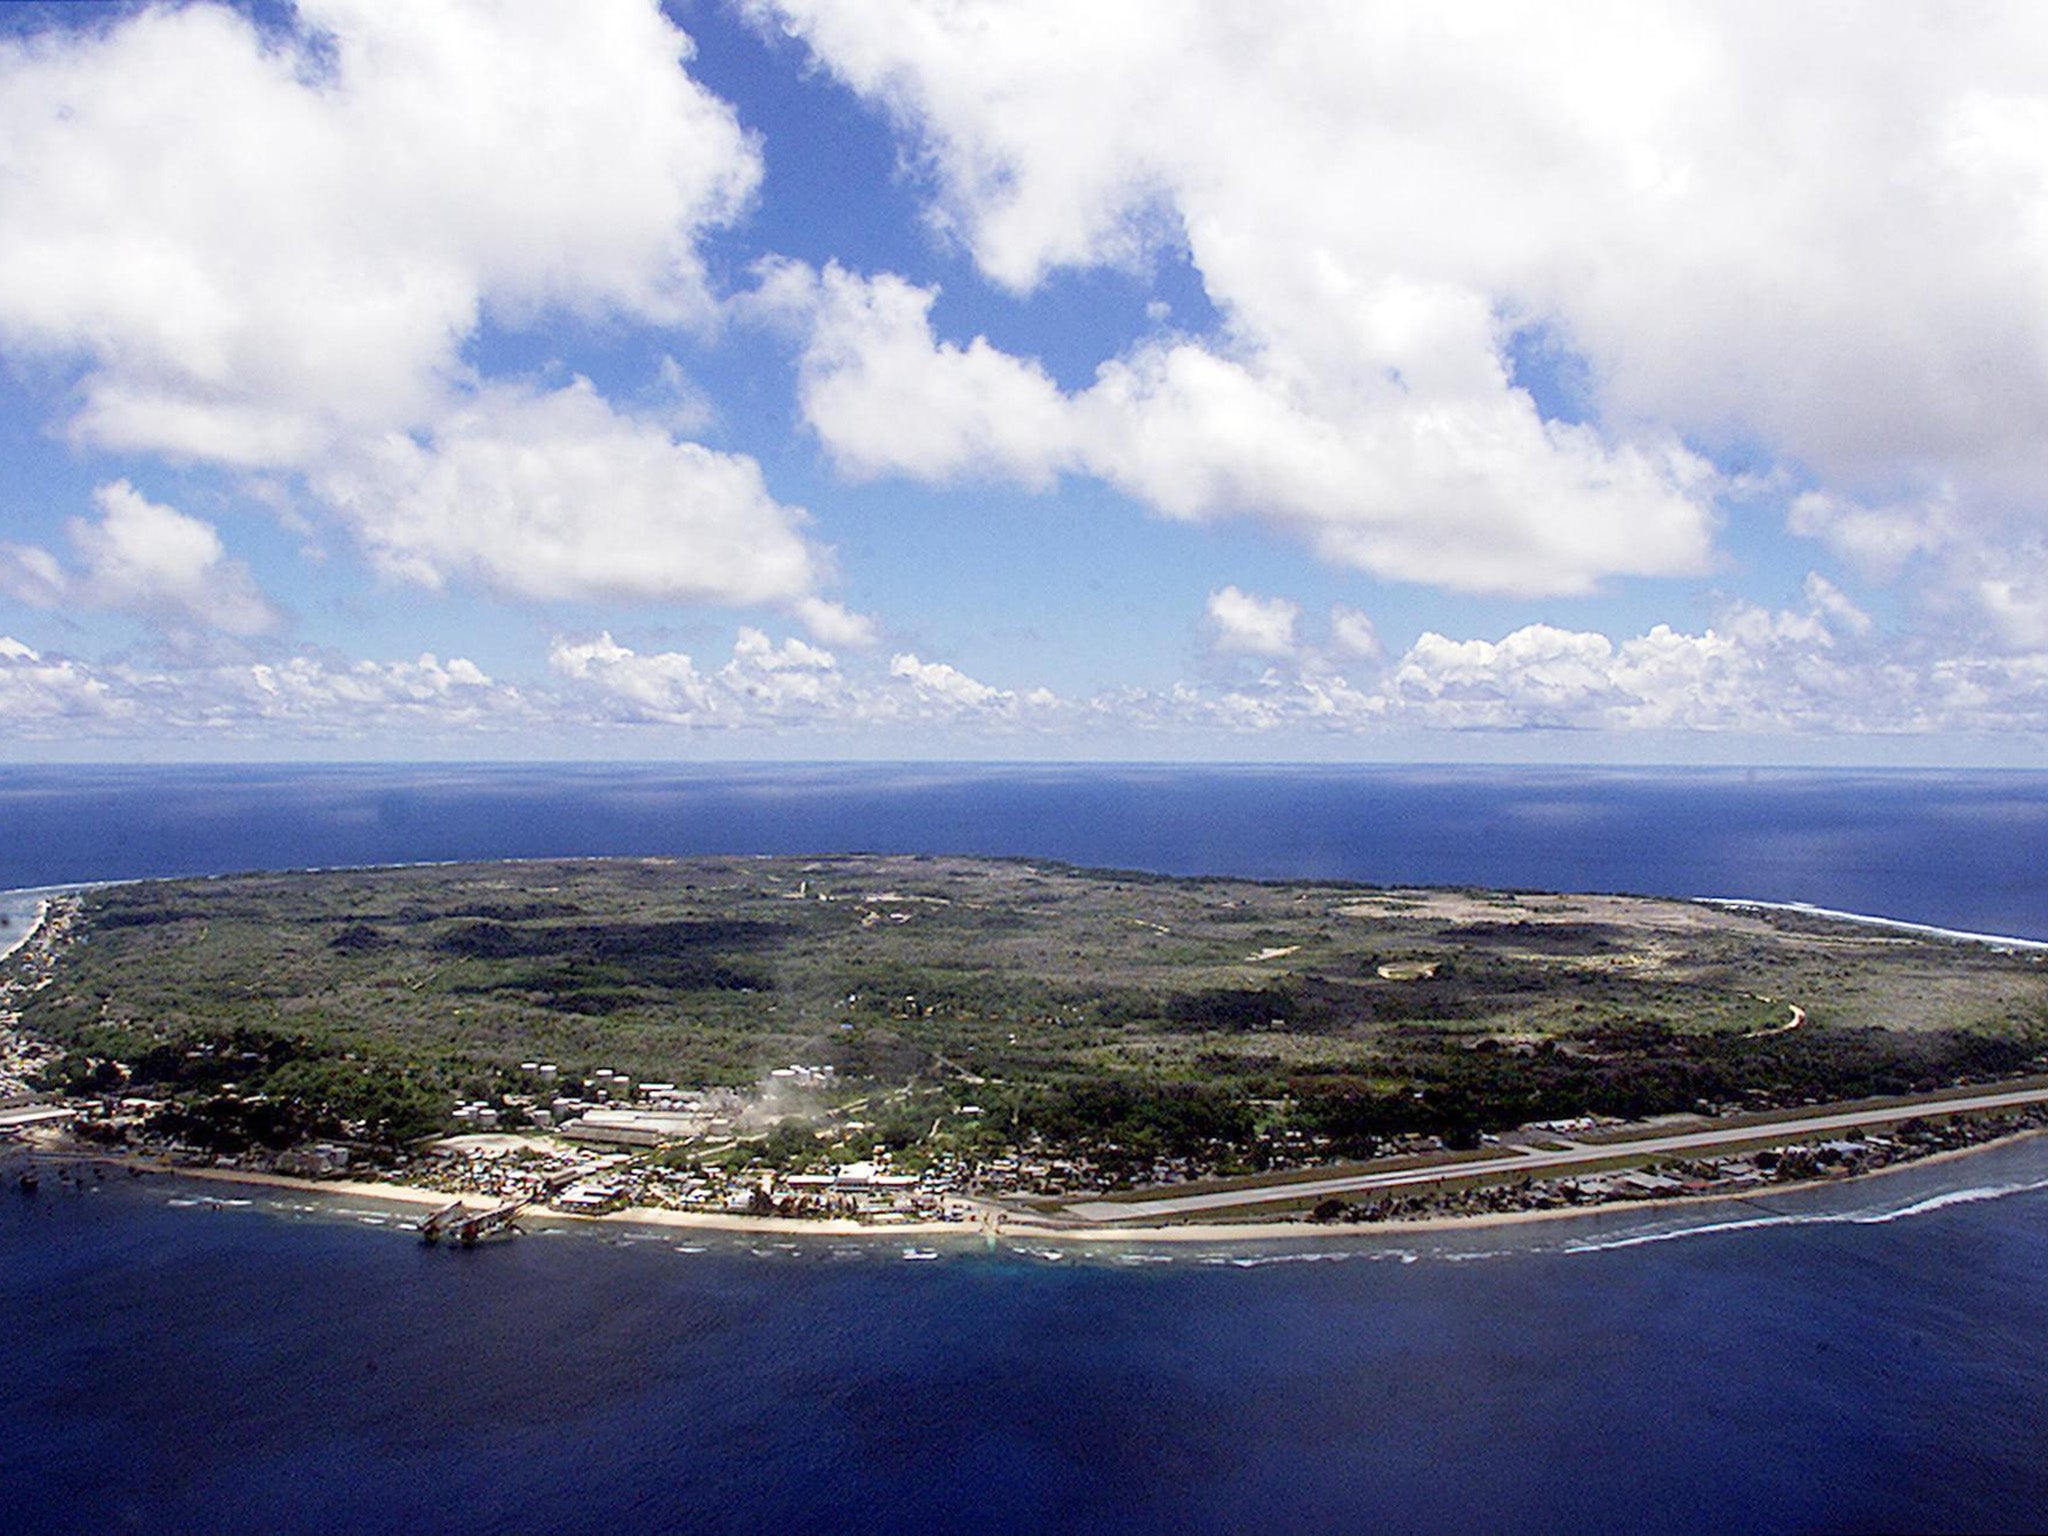 &#13;
The island of Nauru, where asylum seekers who have been refused entry into Australia are sent &#13;